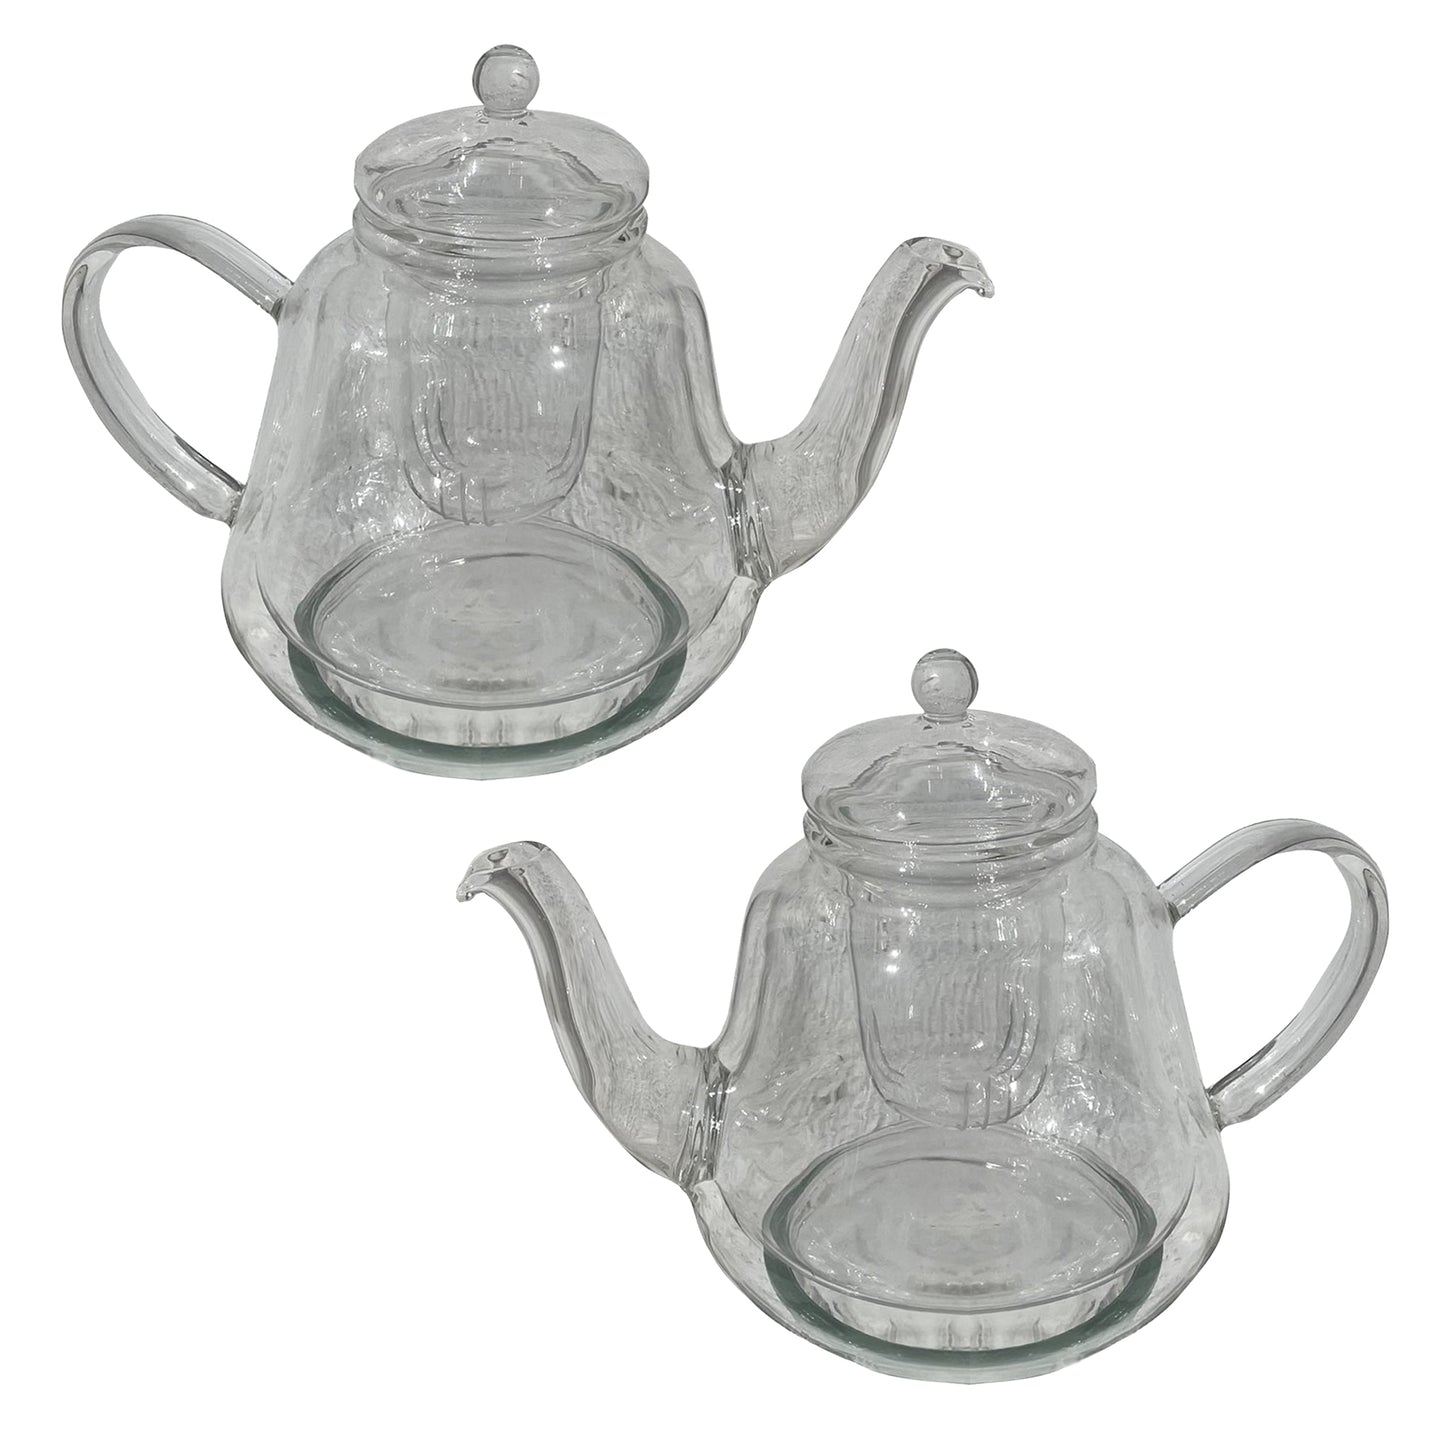 Oval Shaped Double Layer Glass Teapot, 530ml Teapot with Removable Infuser and Lid, Heatproof Safe side handle, Tea Cups